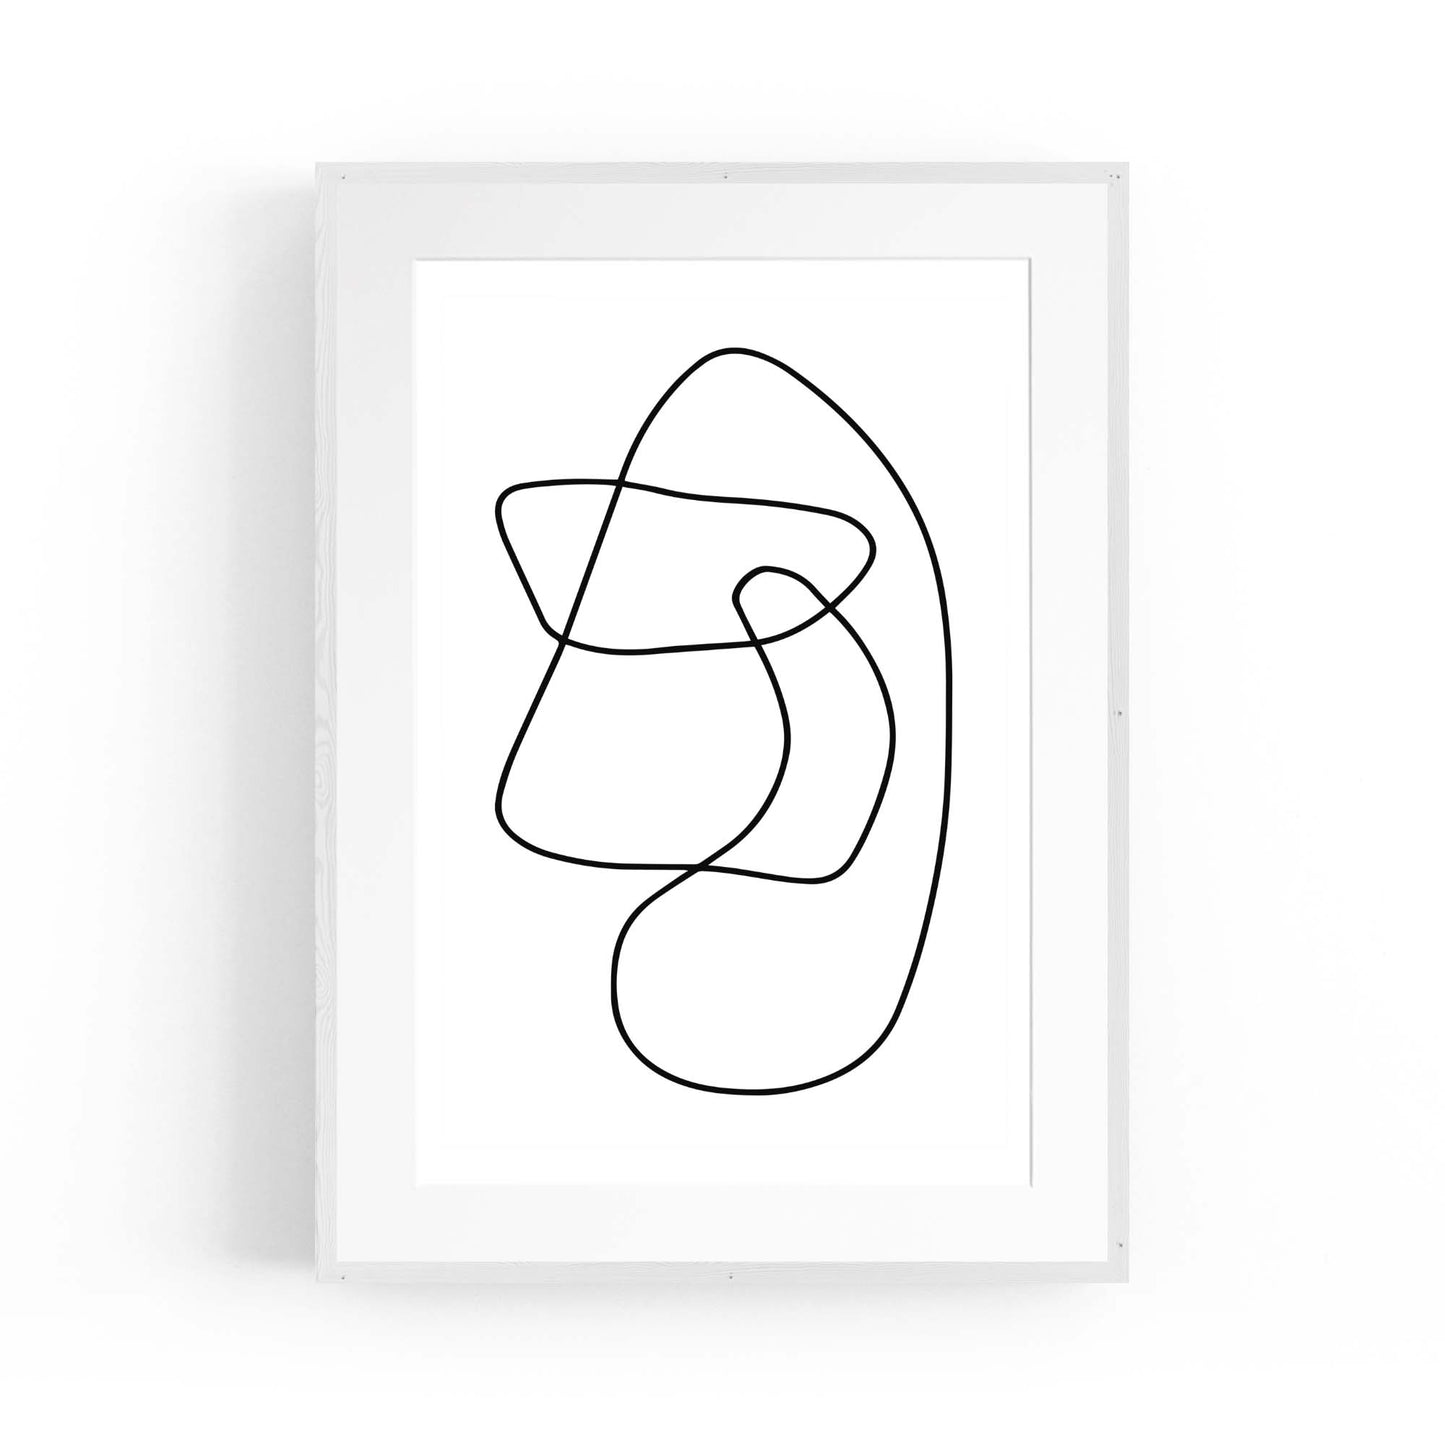 Minimal Abstract Modern Line Artwork Wall Art #3 - The Affordable Art Company